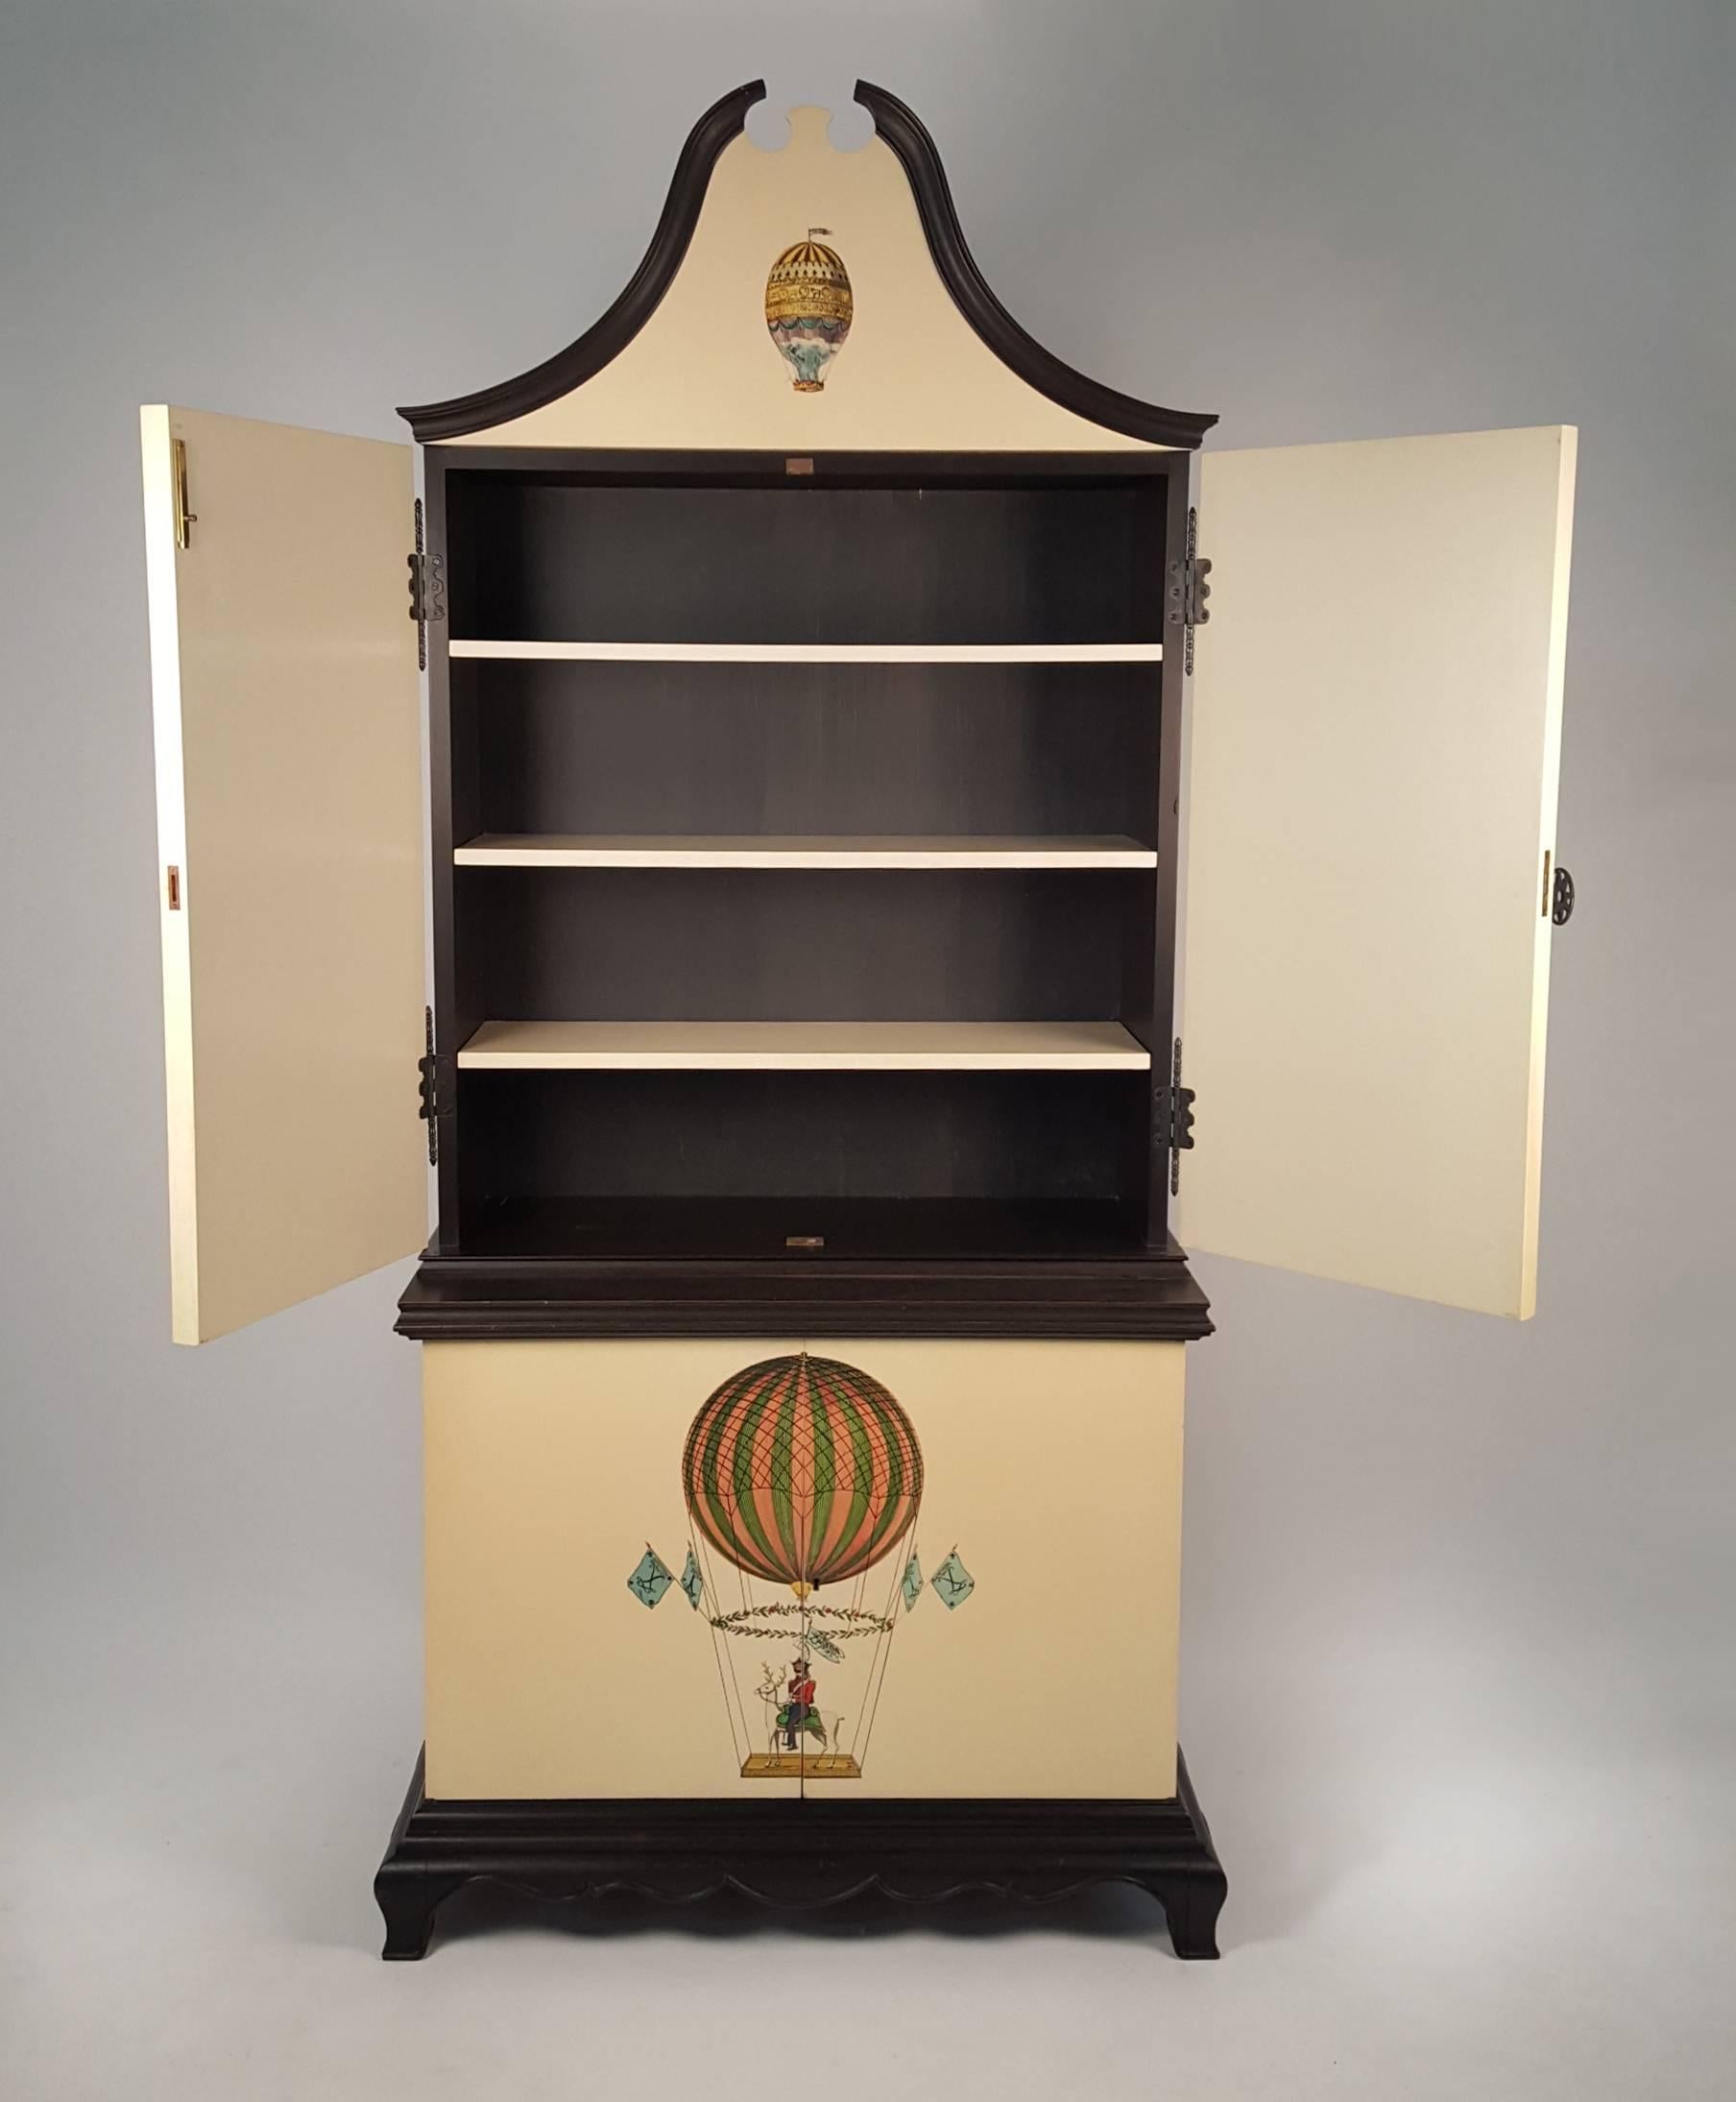 Lacquered Trompe L'oeil Cabinet Embellished with 18th Century Aeronautical Motif